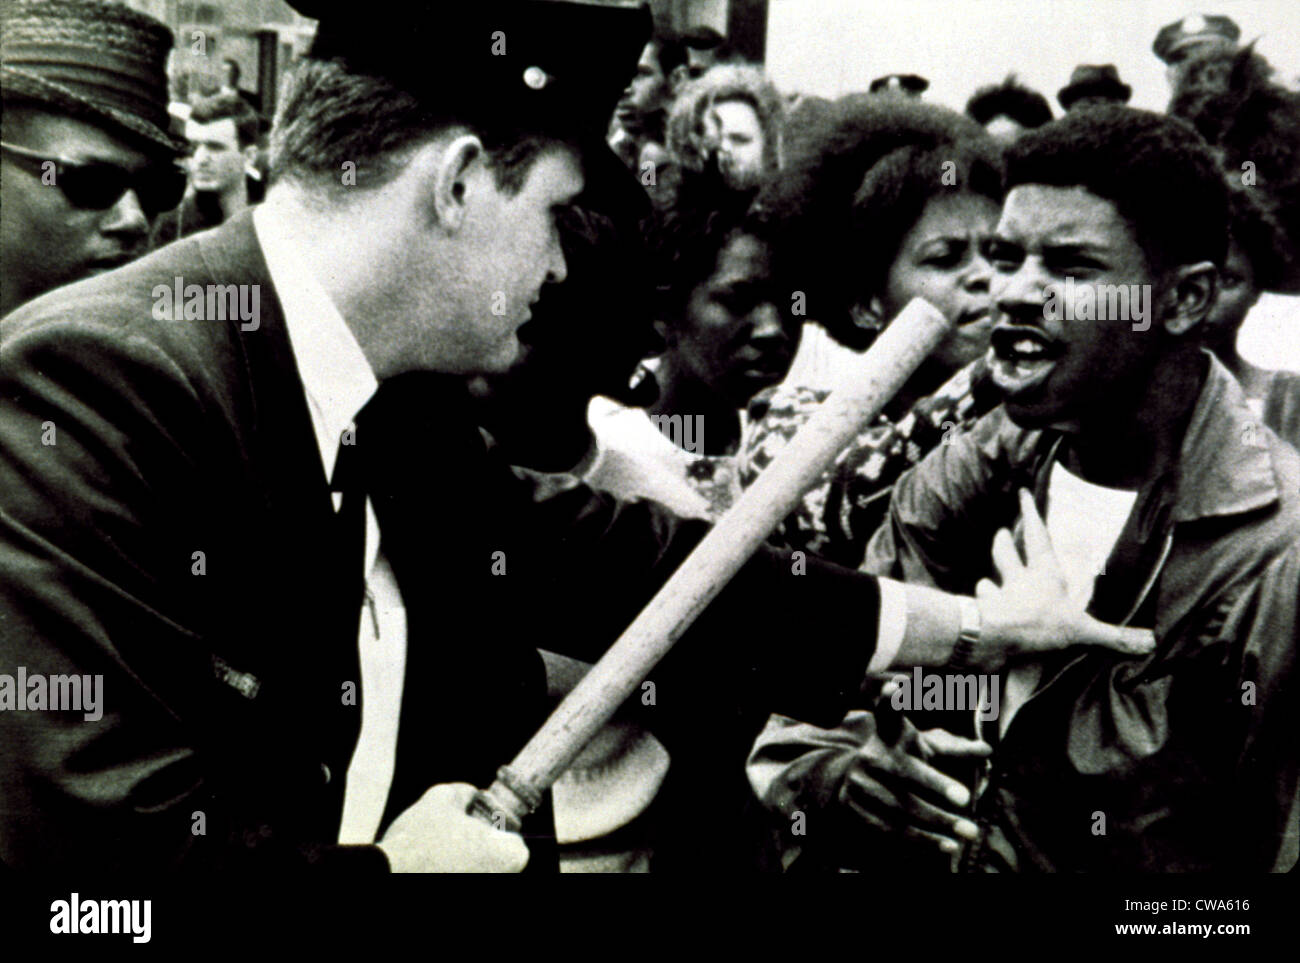 Civil Rights march confrontation with police in 1964. Courtesy: CSU Archives / Everett Collection Stock Photo